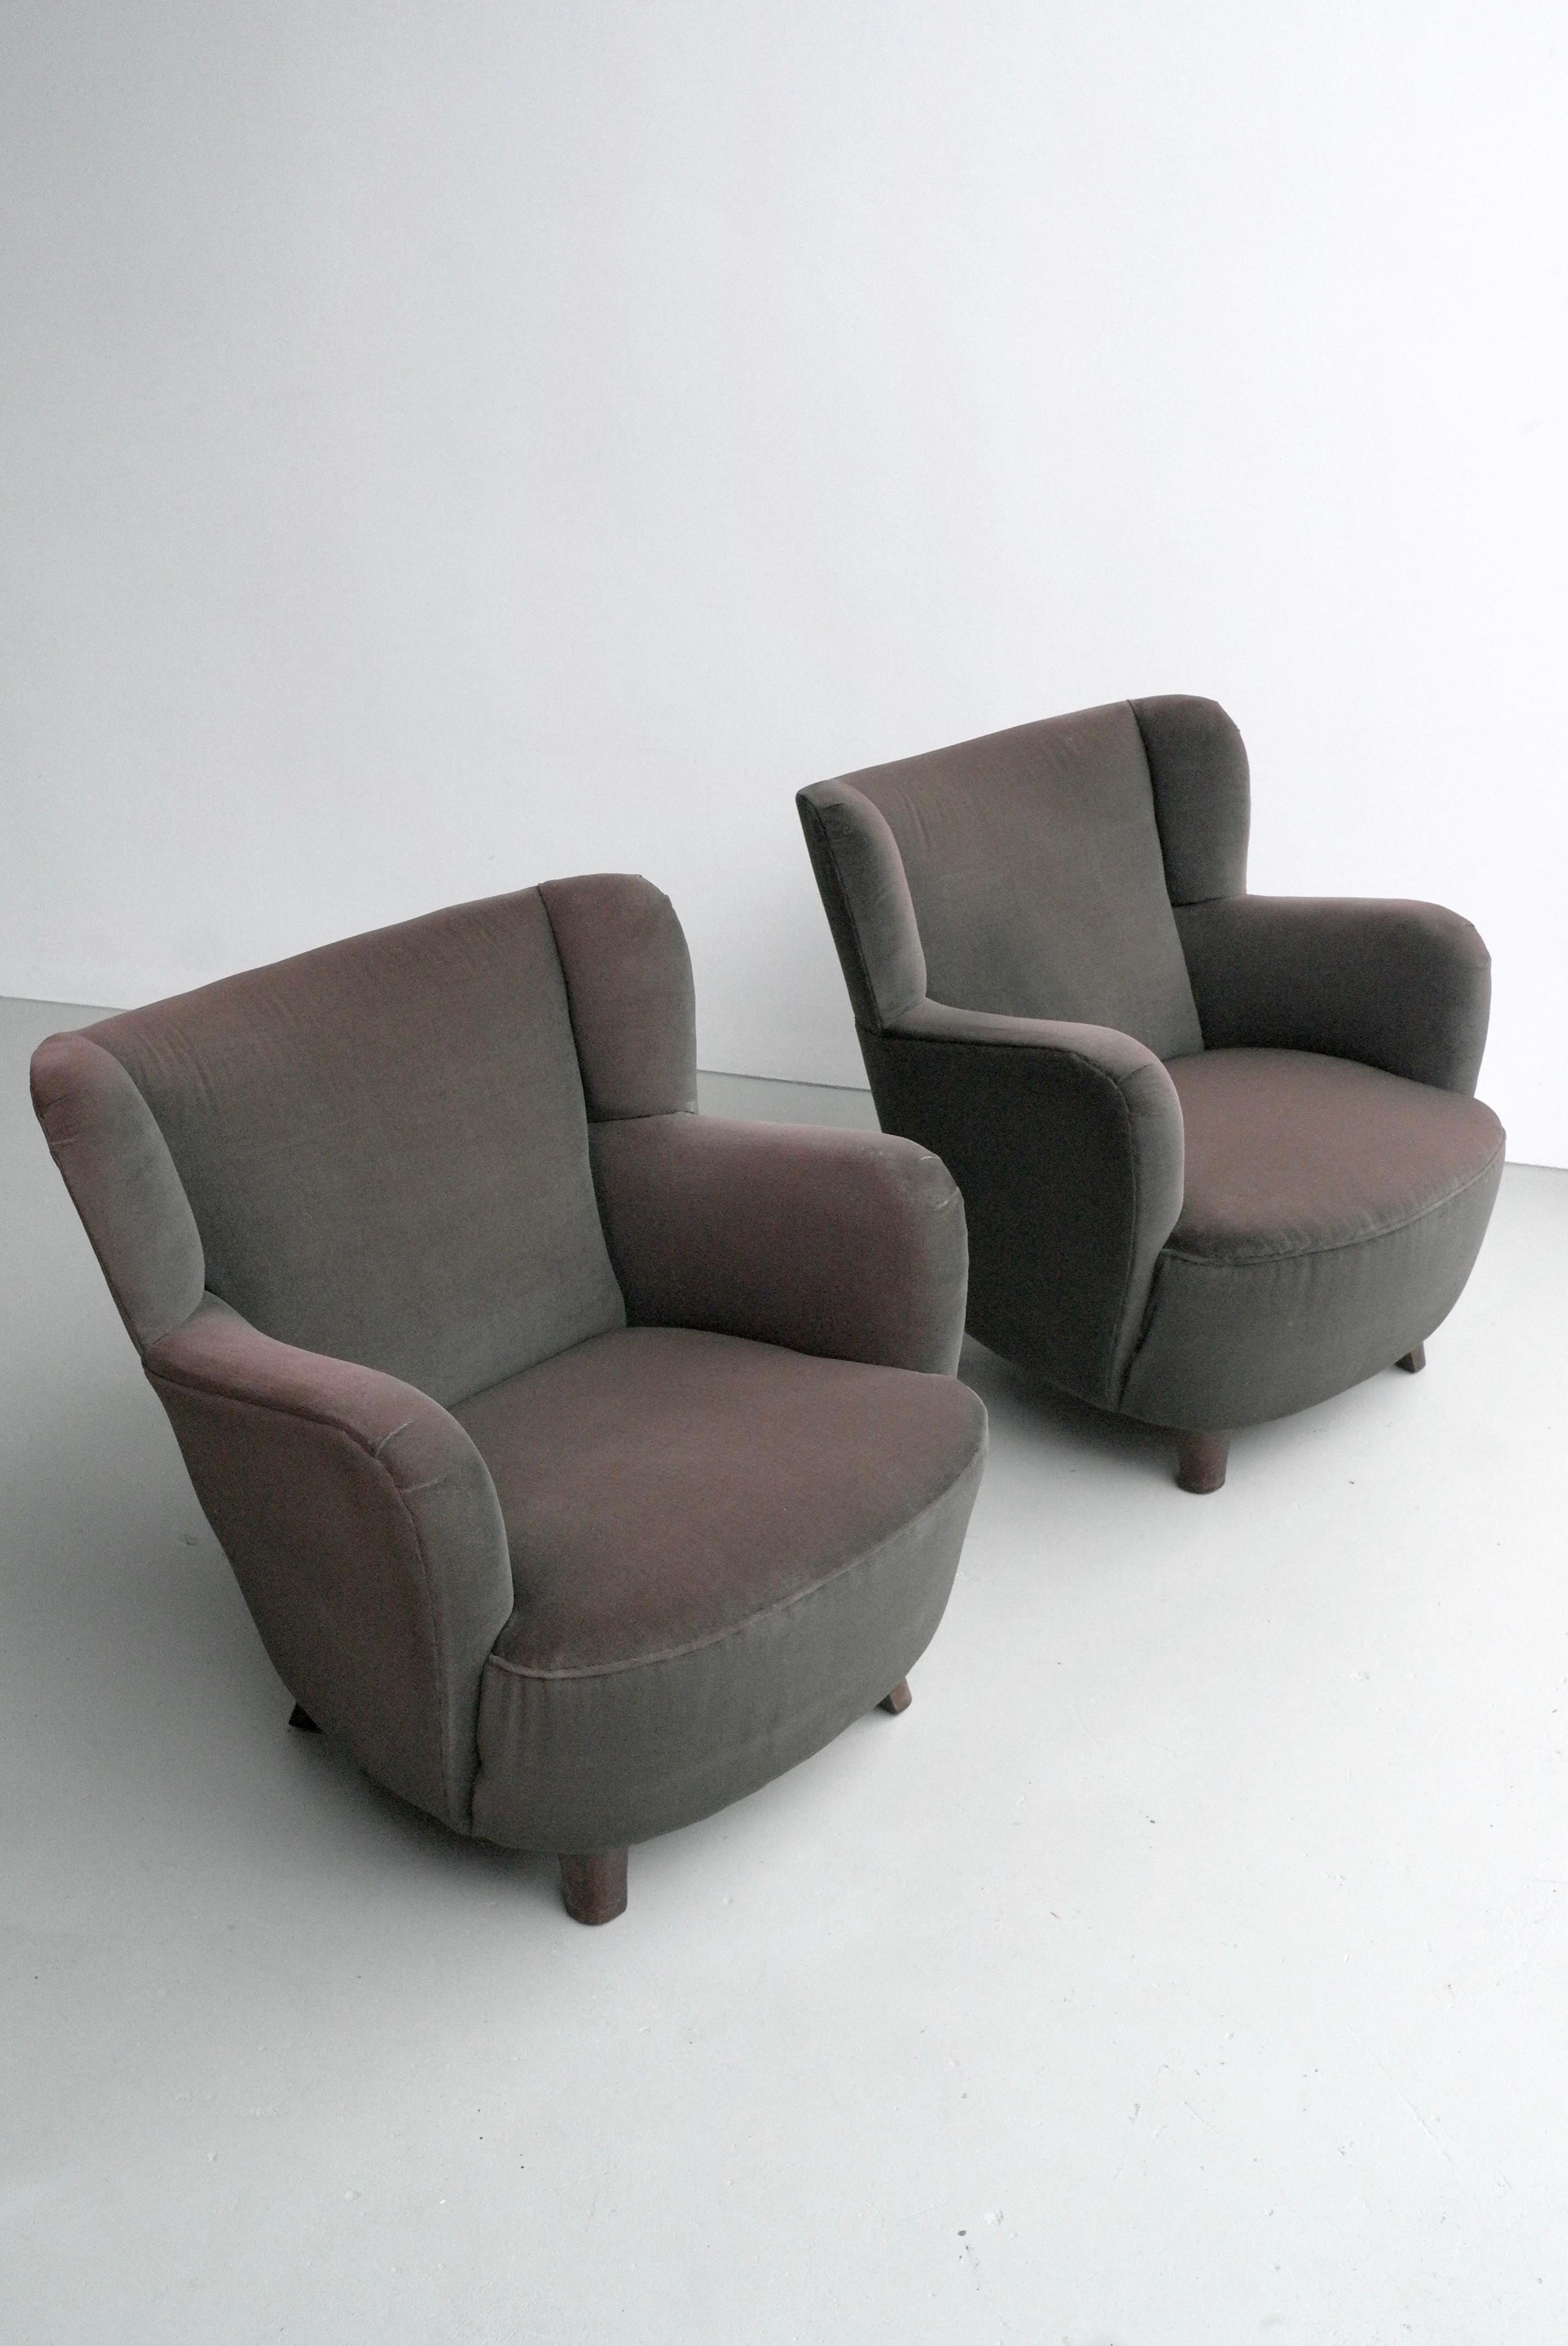 Pair of Mid-Century Modern Danish Lounge Chairs in Brown Eggplant Glow Velvet For Sale 1